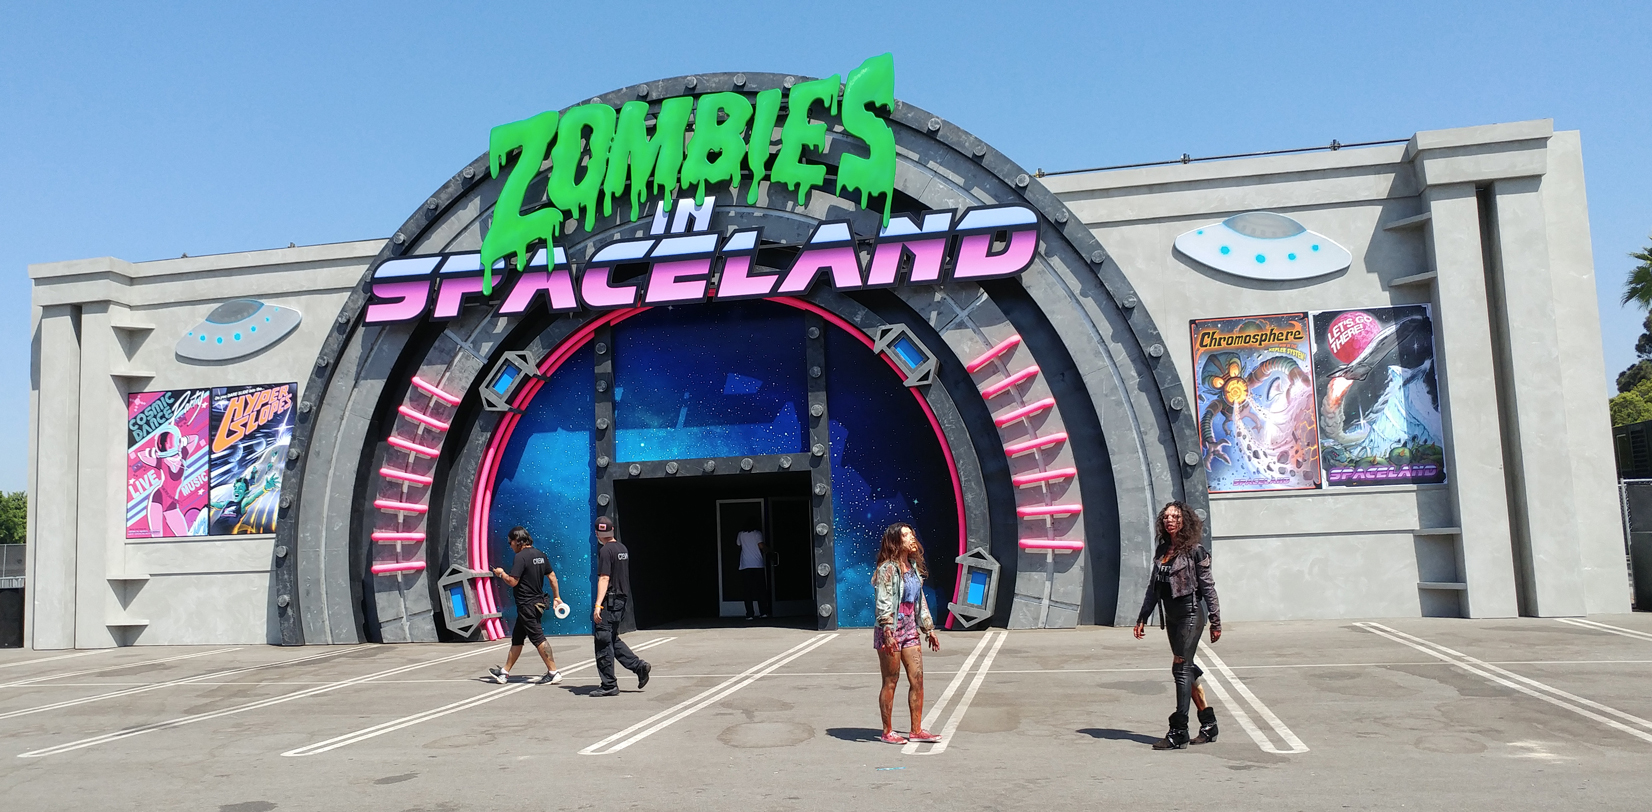 Call of Duty XP 2016 Zombies in Spaceland